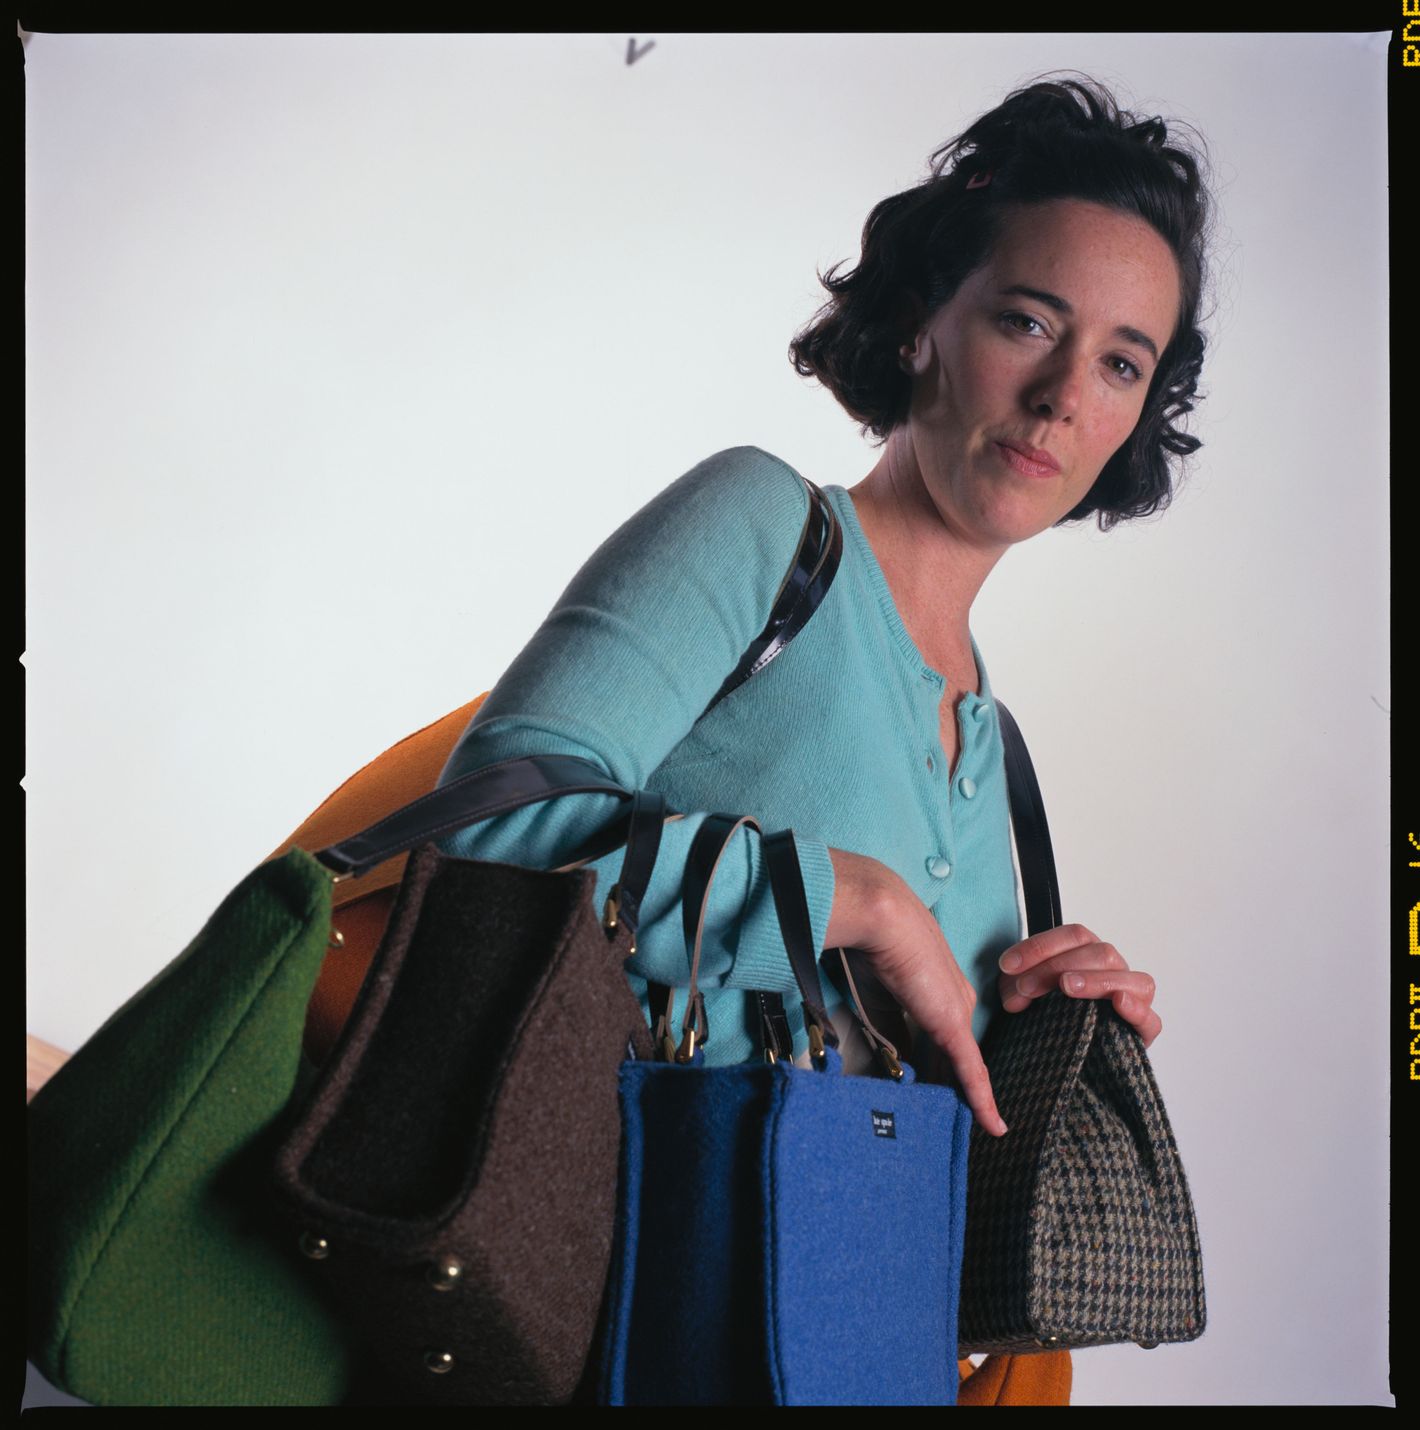 Remembering Kate Spade and the Women She Inspired Us to Pretend to